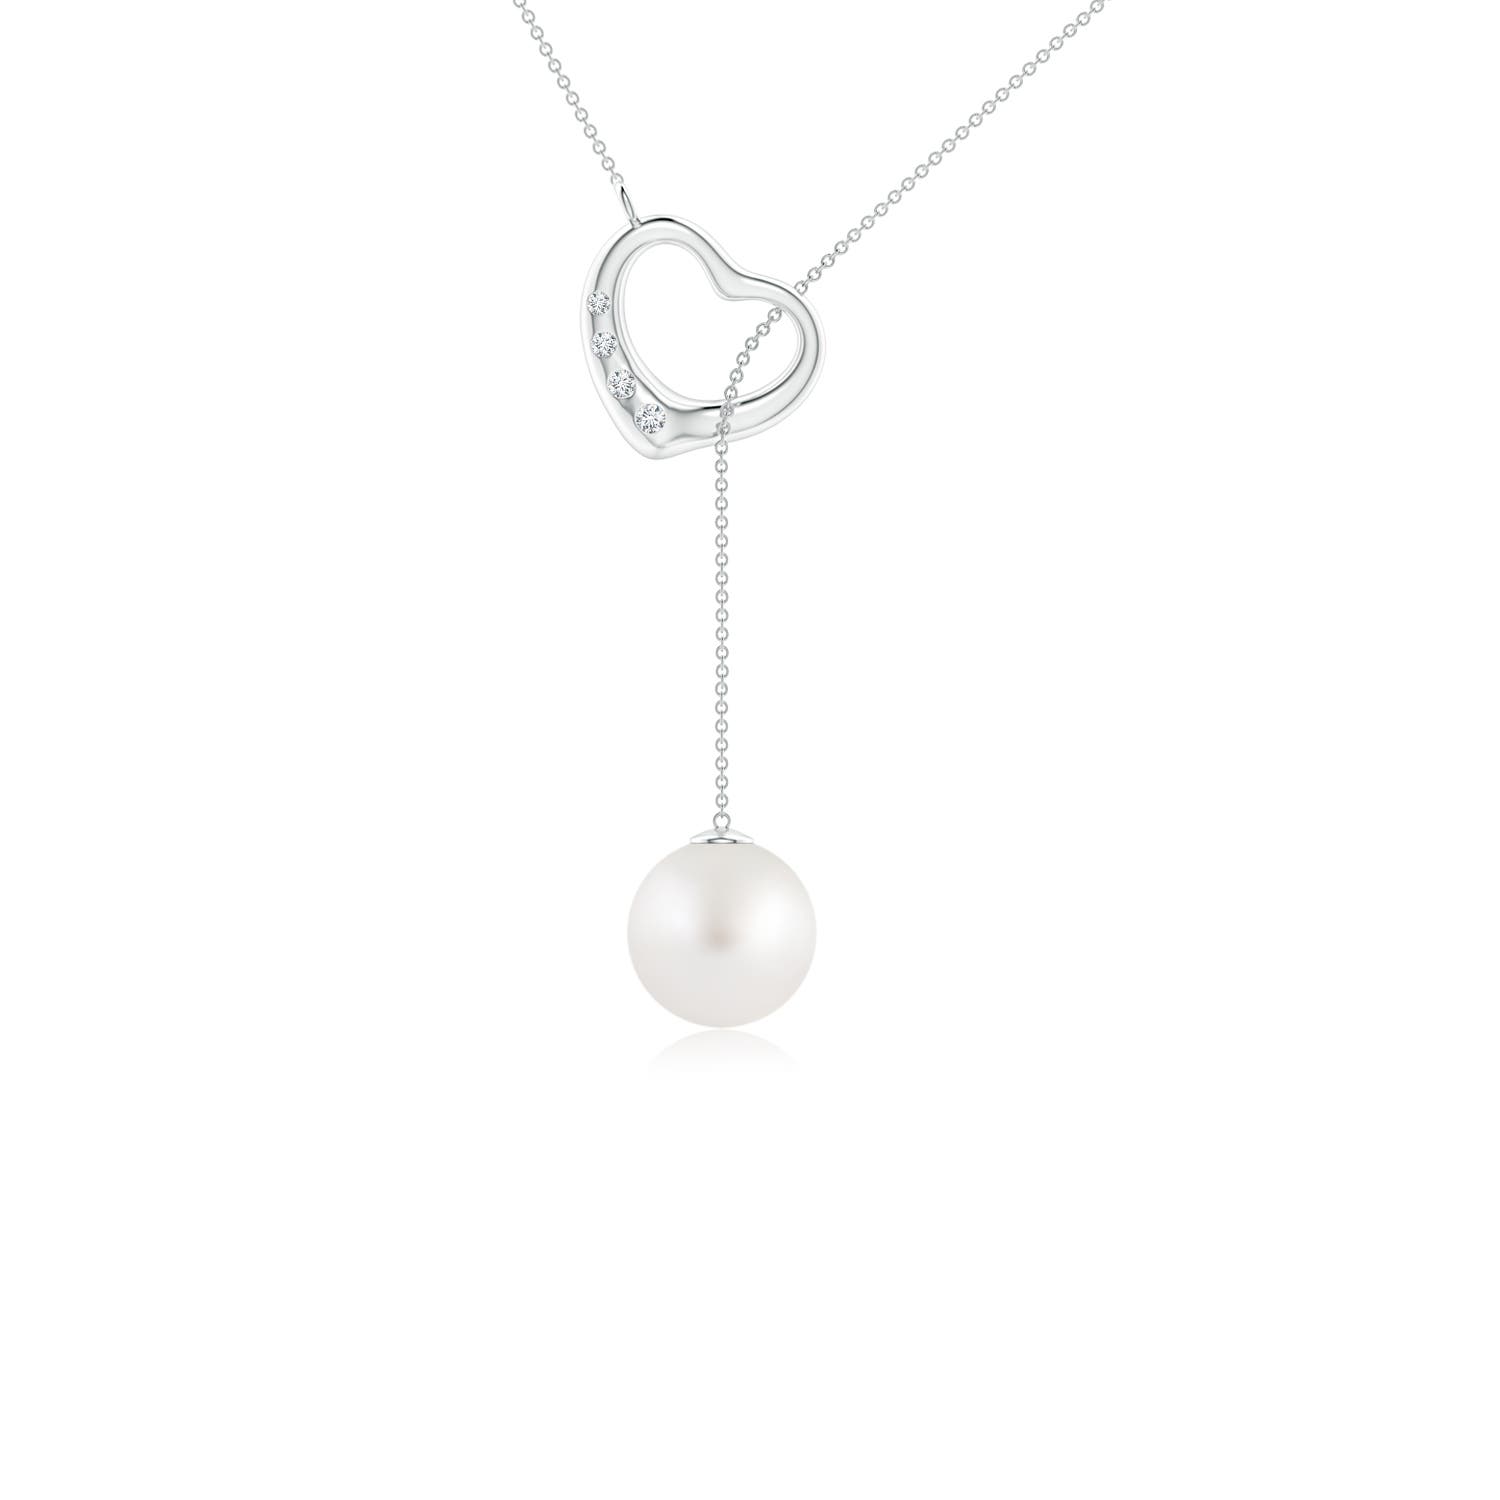 AA - South Sea Cultured Pearl / 3.73 CT / 14 KT White Gold